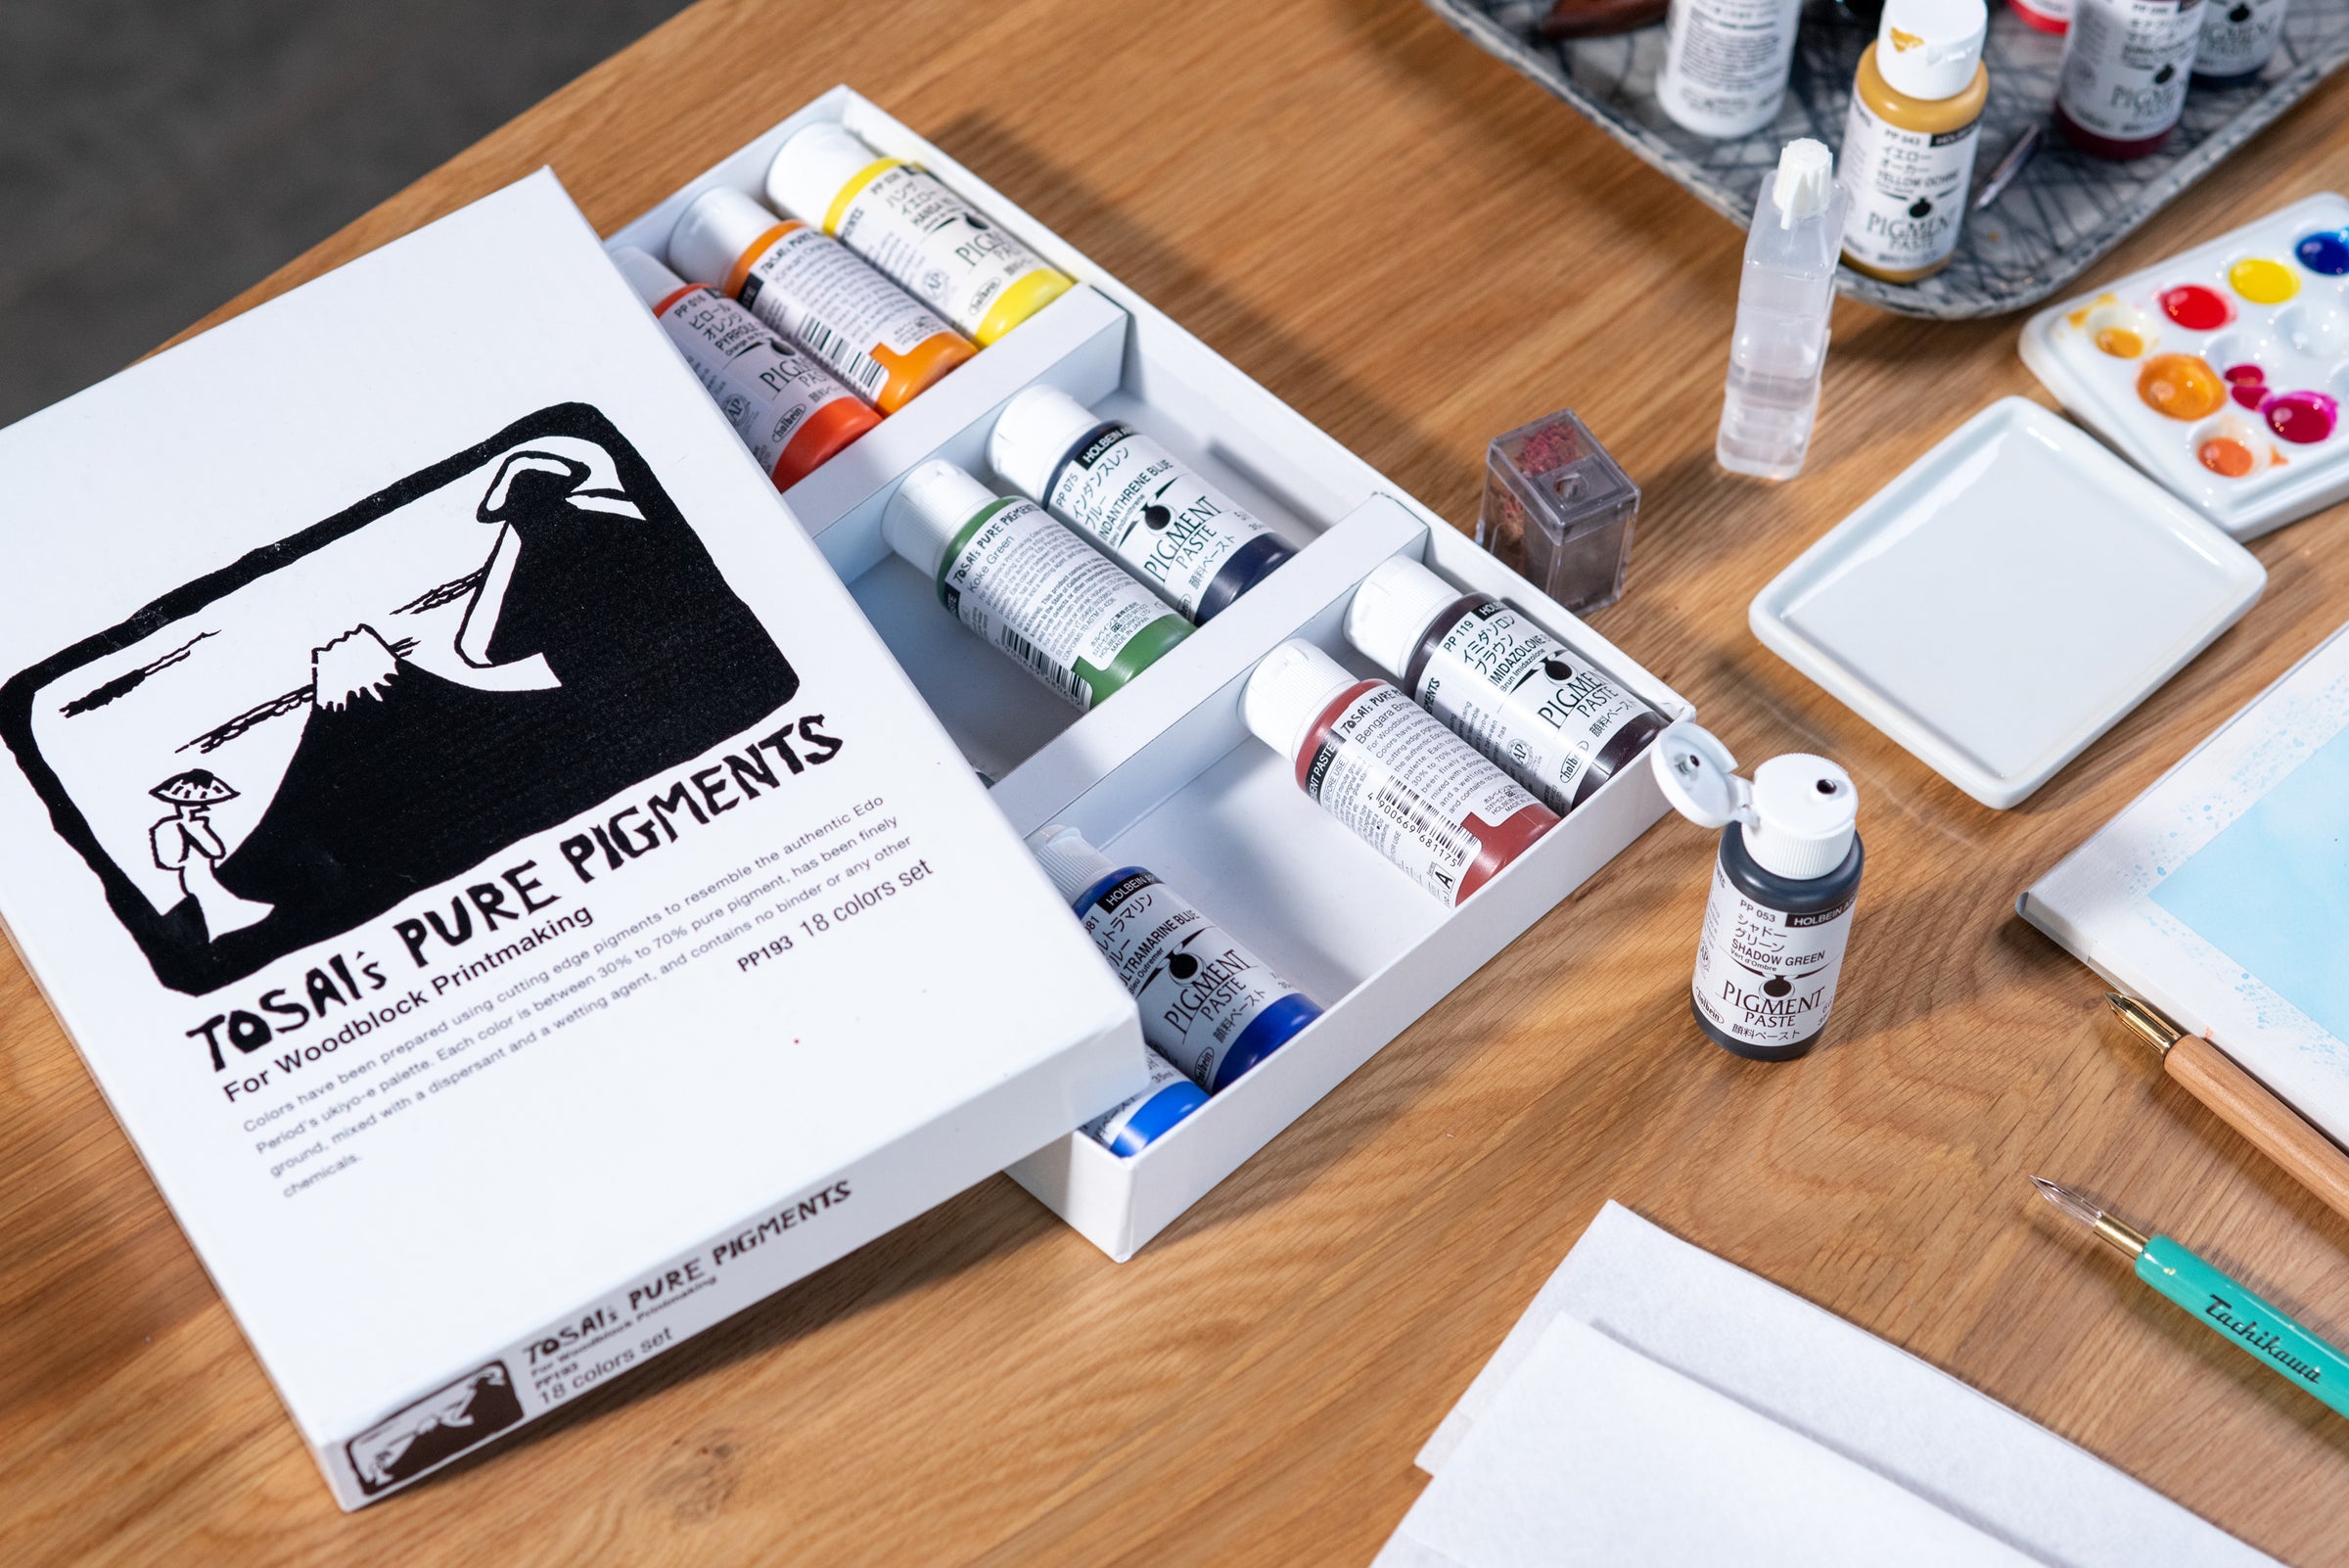 Pigment Paste – Prosthetic and Orthotic Components and Consumables